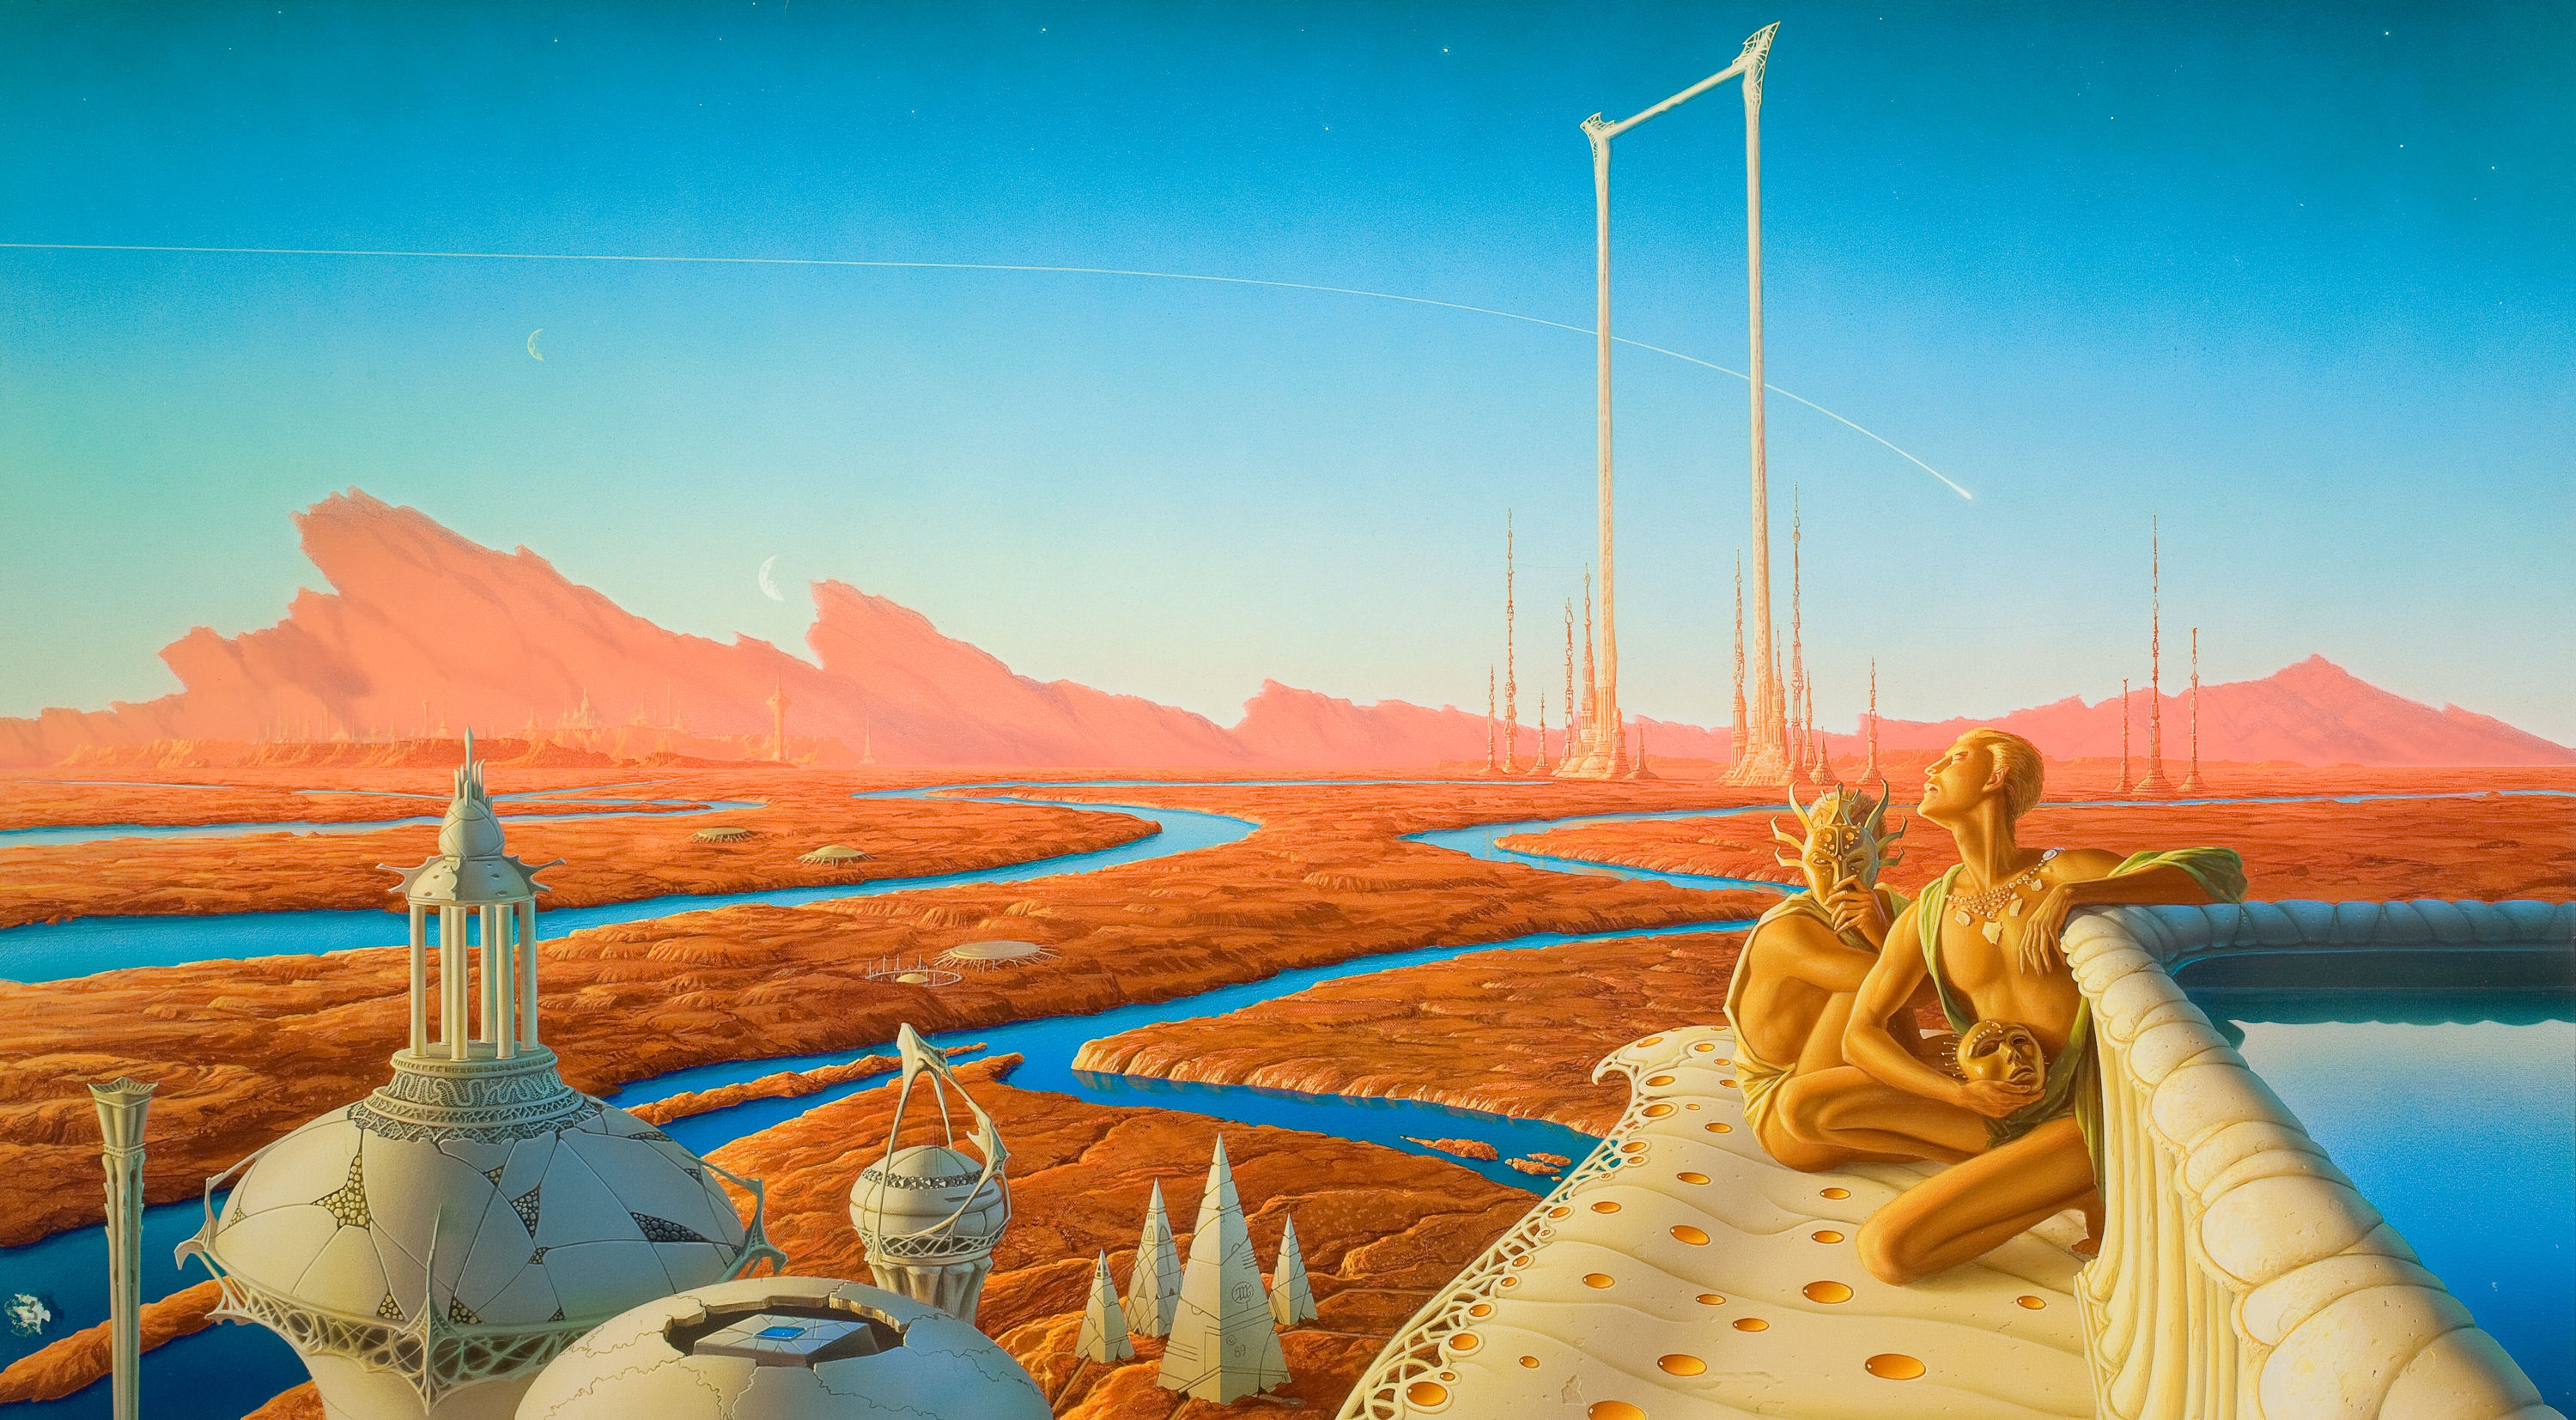 Book Cover Throwback: The Martian Chronicles by Ray Bradbury